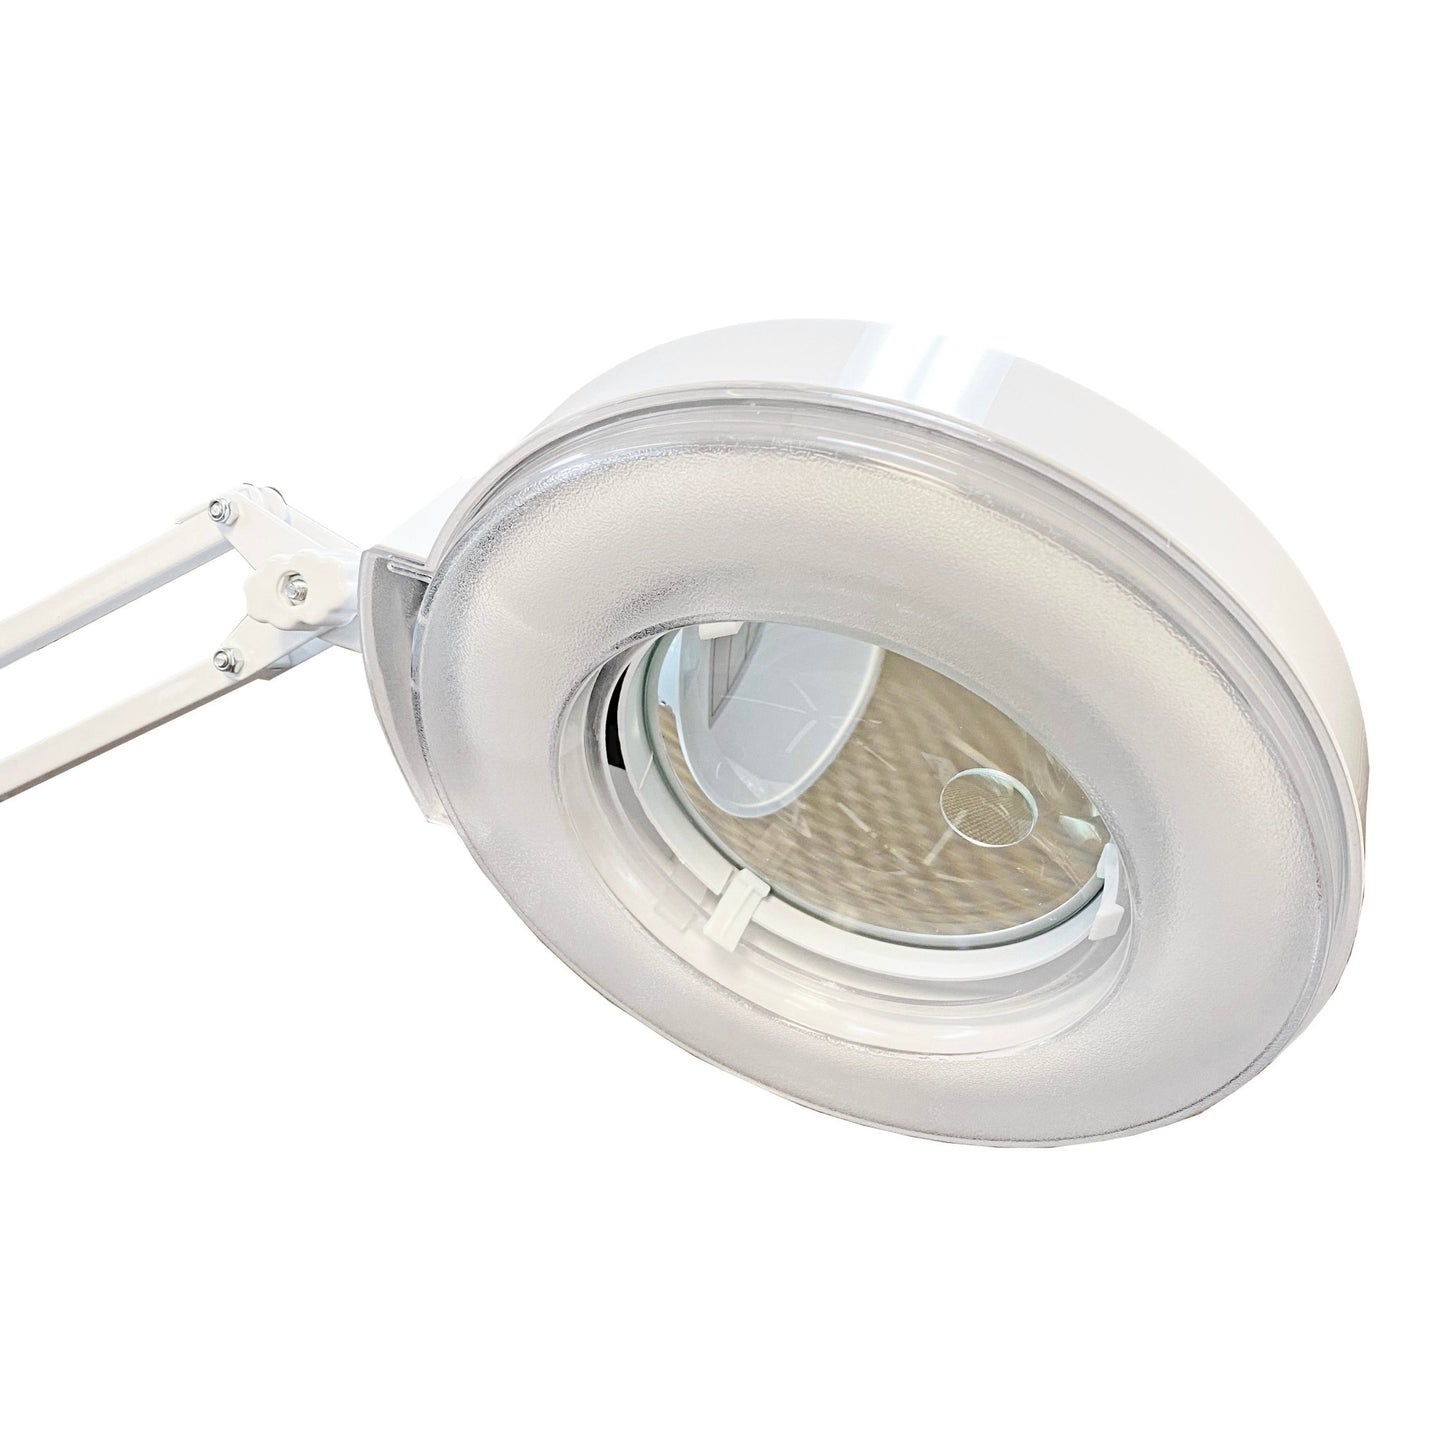 MS-2021 | Magnifying Lamp | Barber and Stylist Hair Salon Accessories - SH Salons